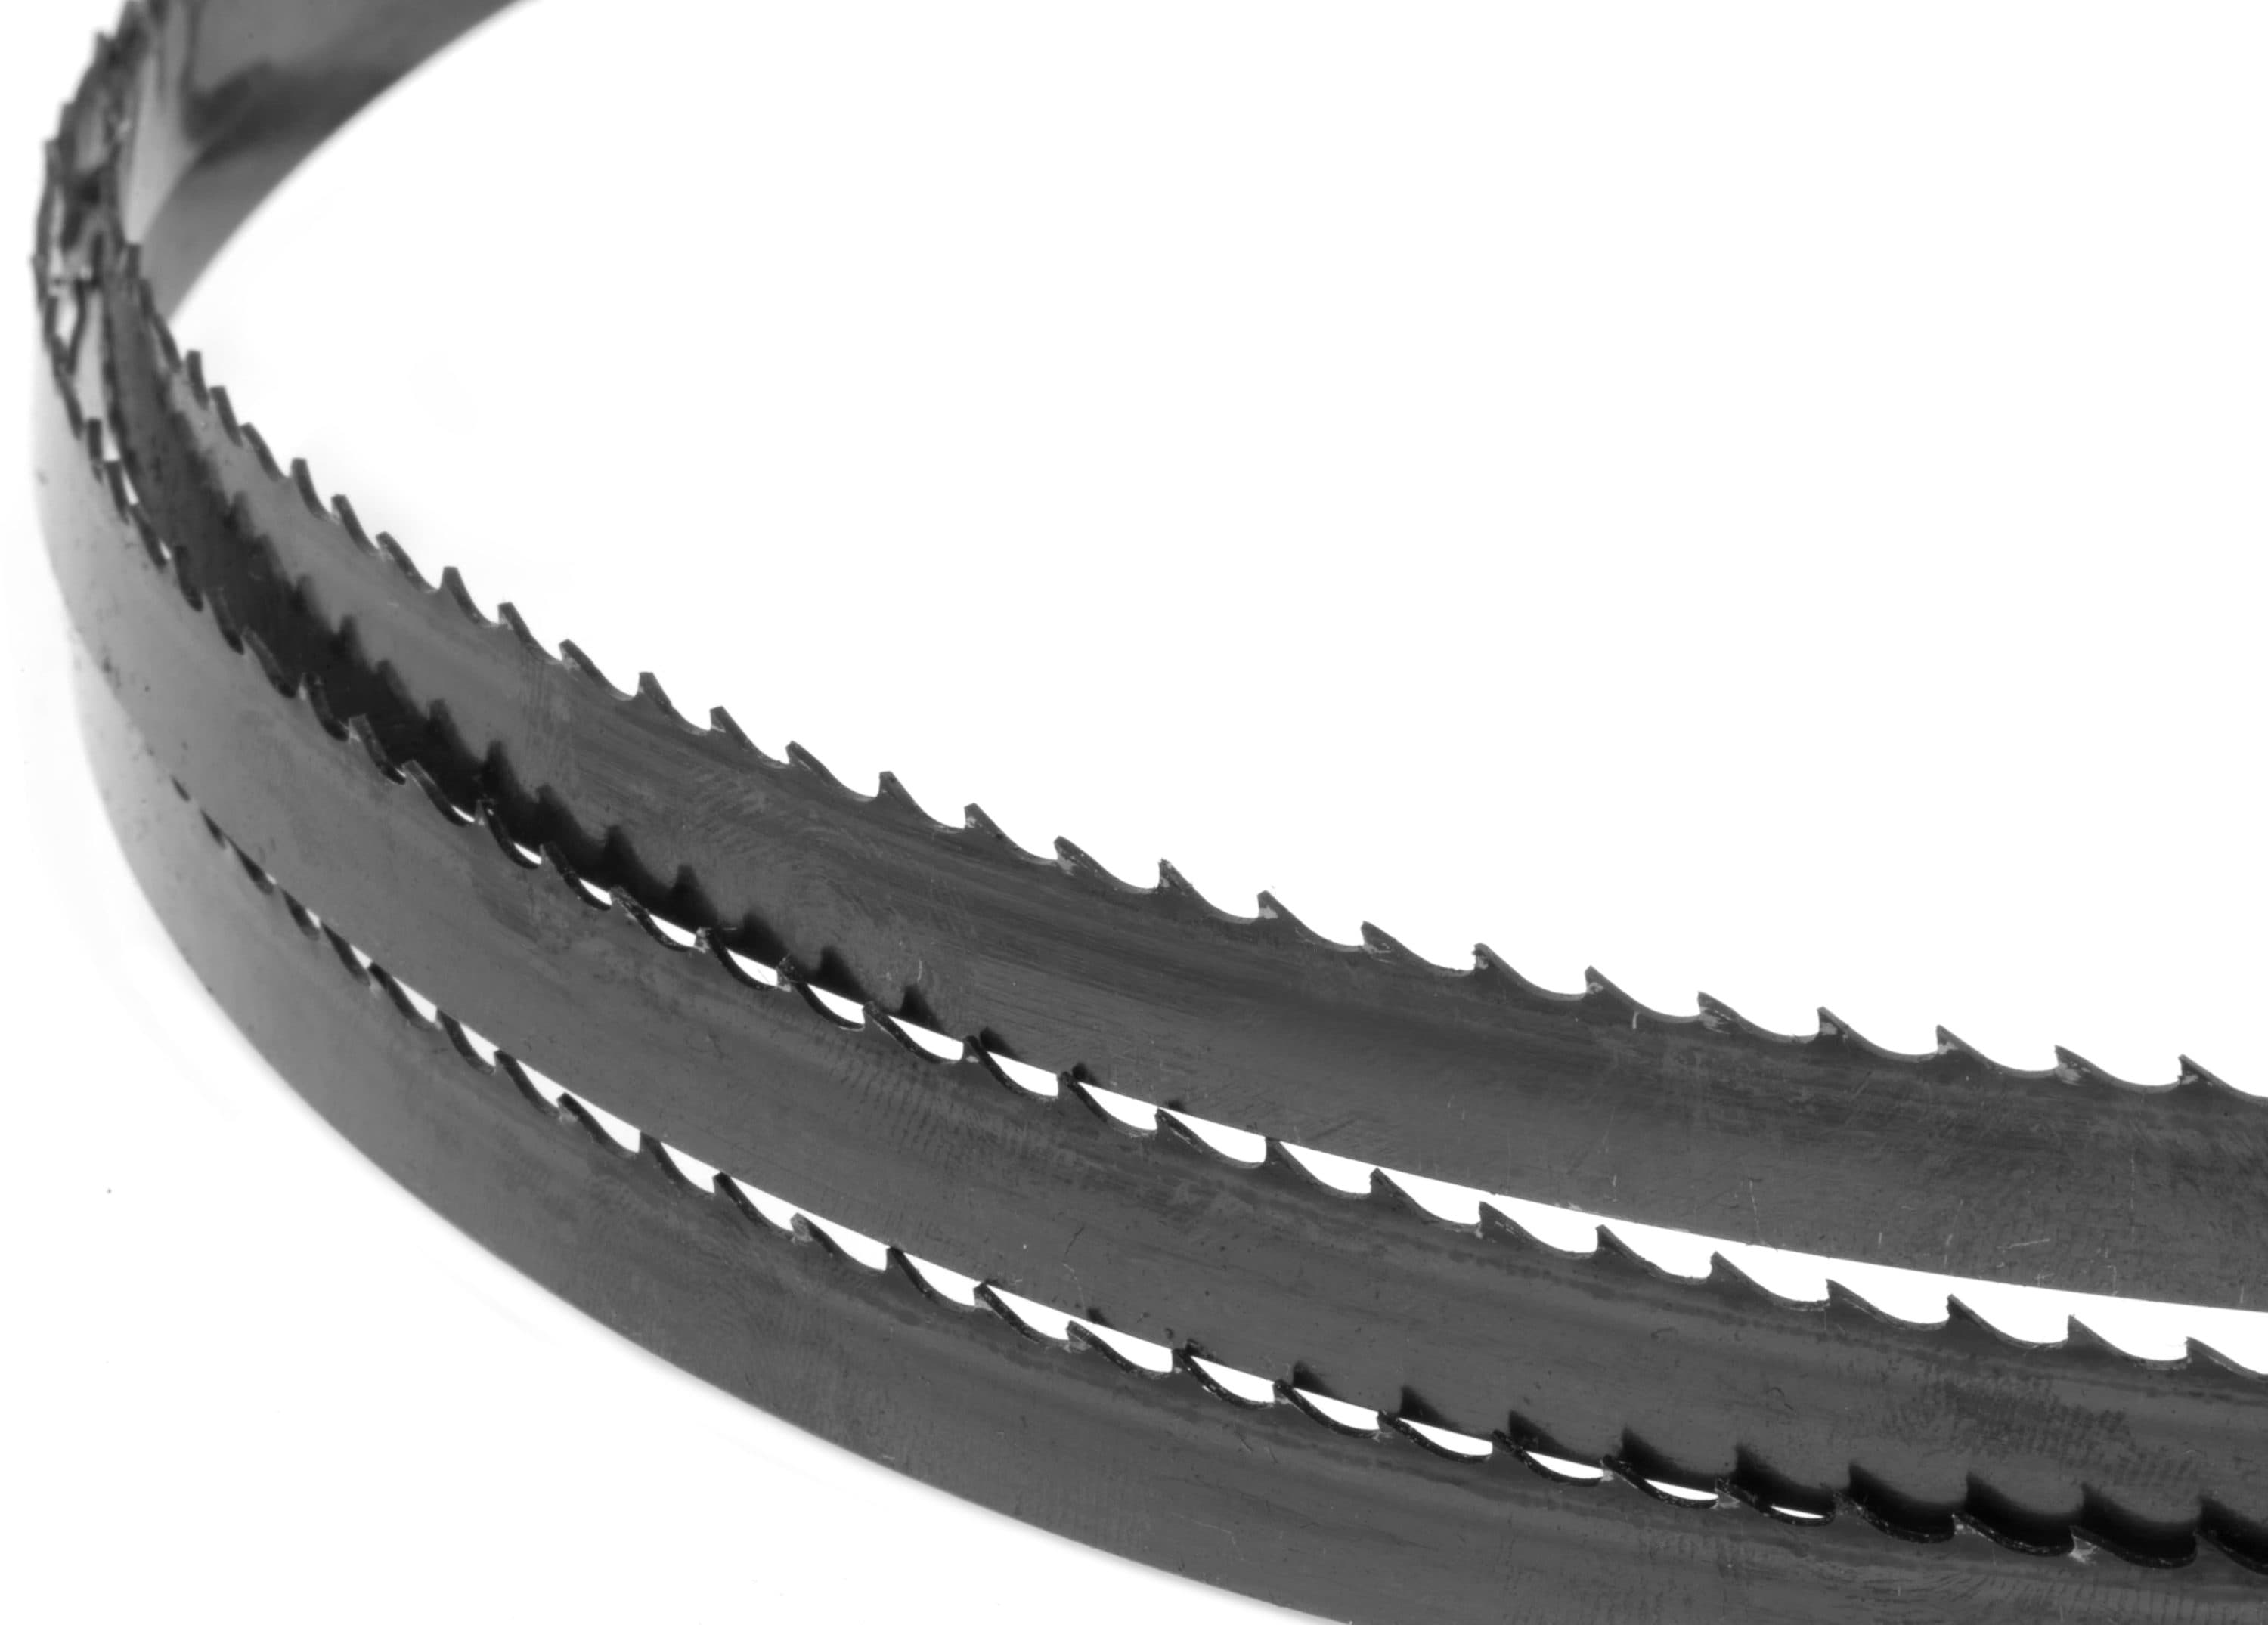 are bandsaw blades universal?